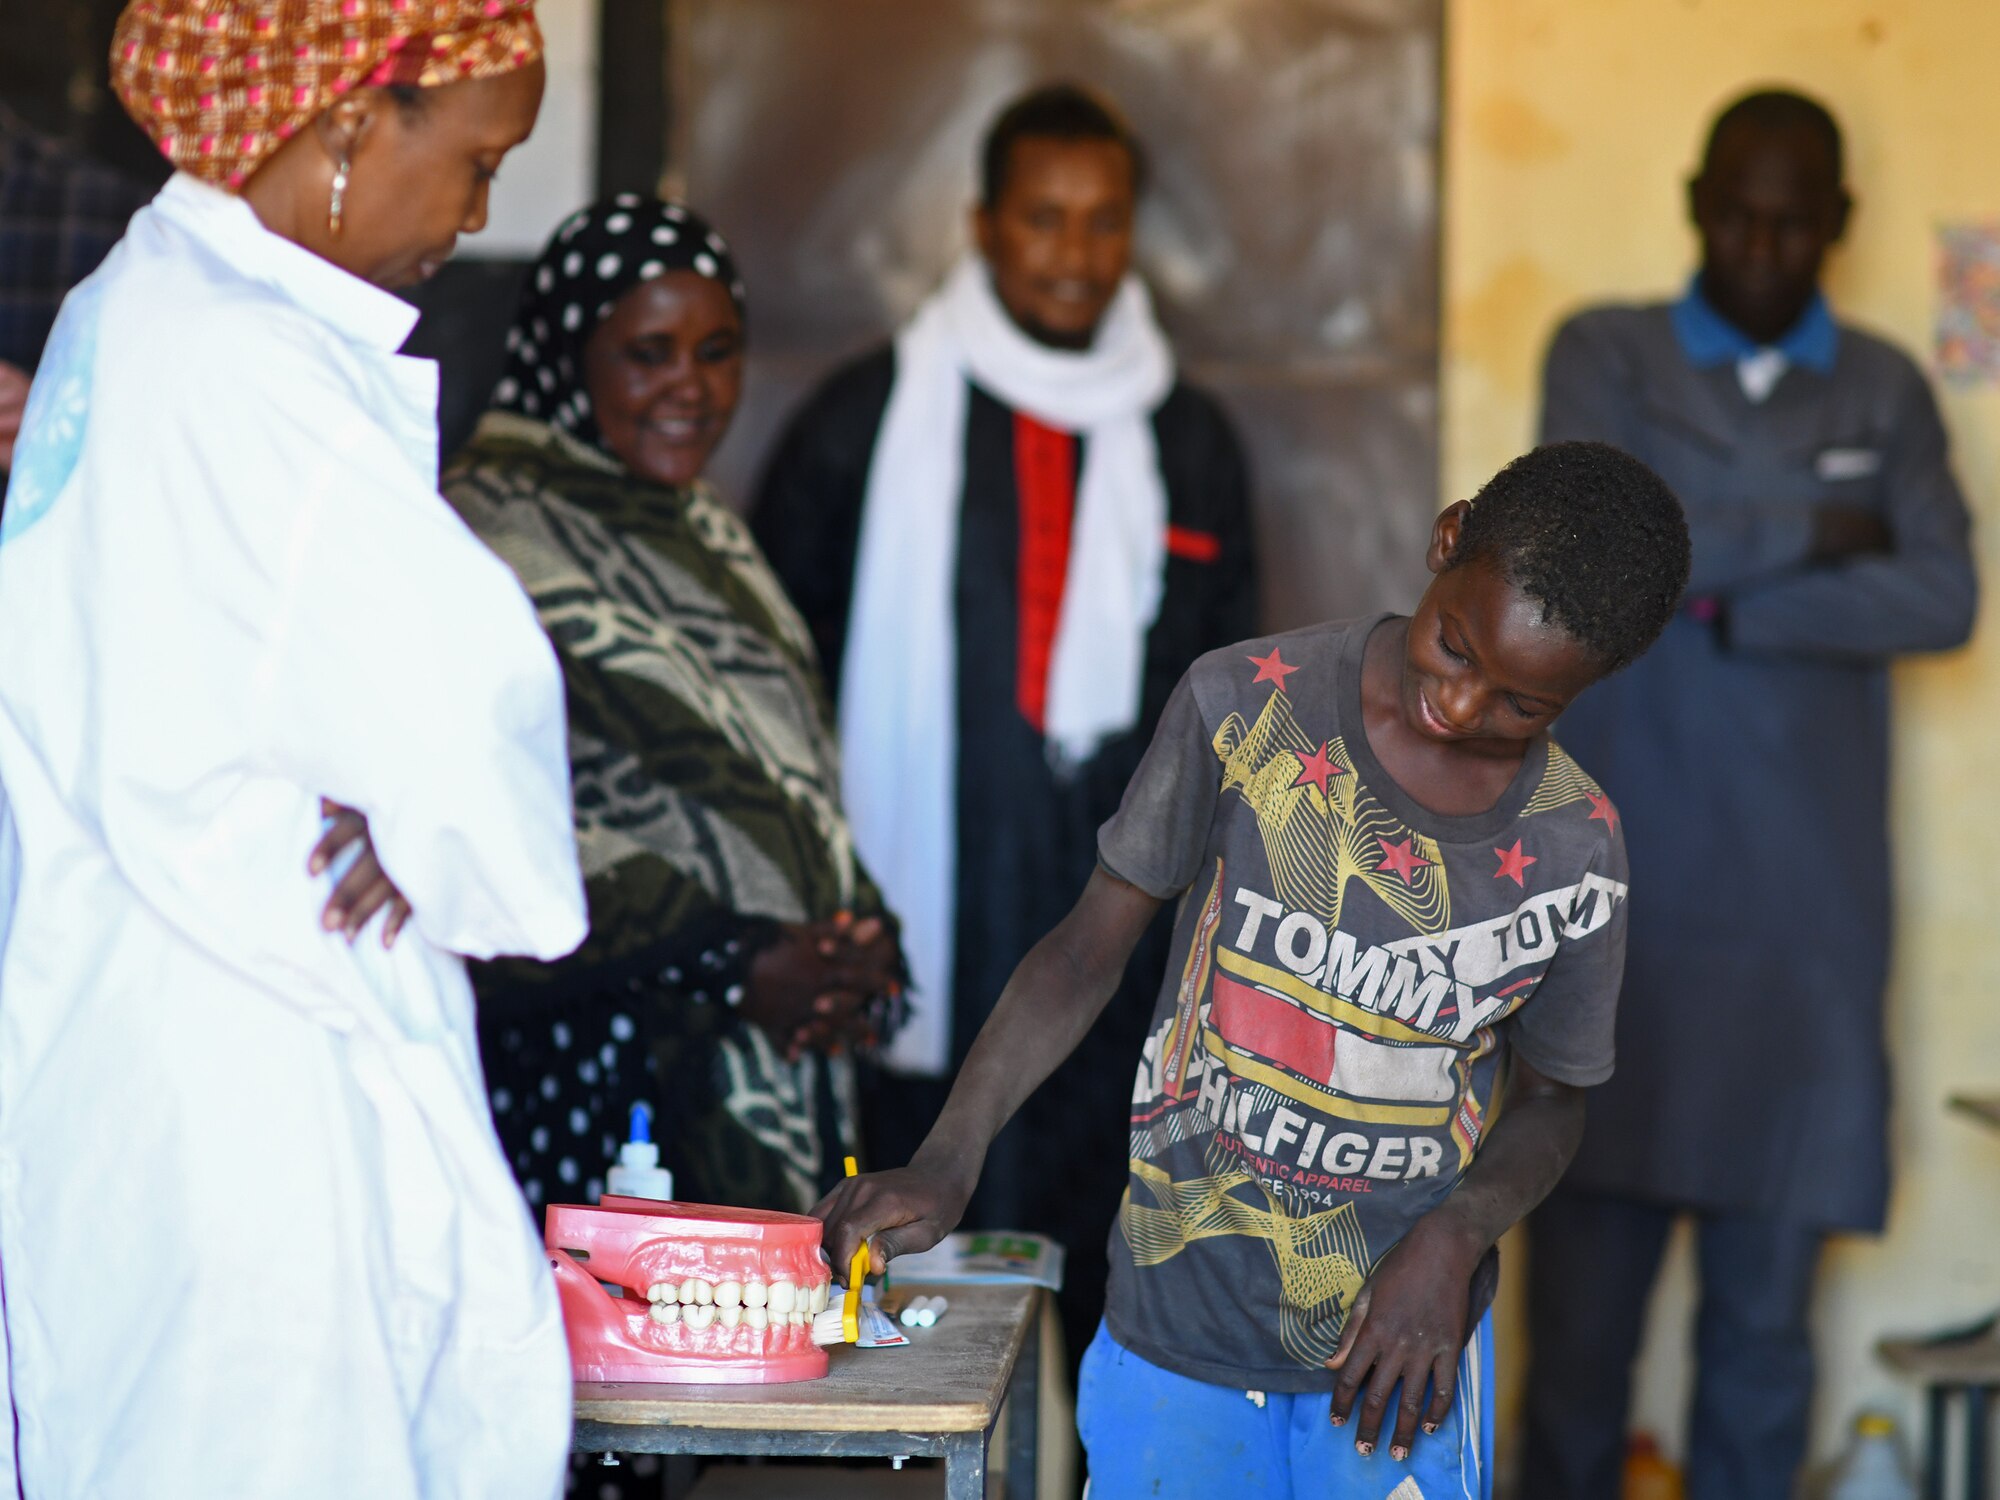 A local student learns how to brush his teeth during a dental hygiene course in the village of Tsakatalam, Niger, Dec. 14, 2019. The U.S. Army 443rd Civil Affairs Battalion Civil Affairs Team 219 deployed to Nigerien Air Base 201 partnered with local Agadez city dentist, Dr. Mahaman Aicha, to teach the Tsakatalam Primary School students for the first time how to properly brush and floss their teeth and the importance of good oral health. (U.S. Air Force photo by Staff Sgt. Alex Fox Echols III)